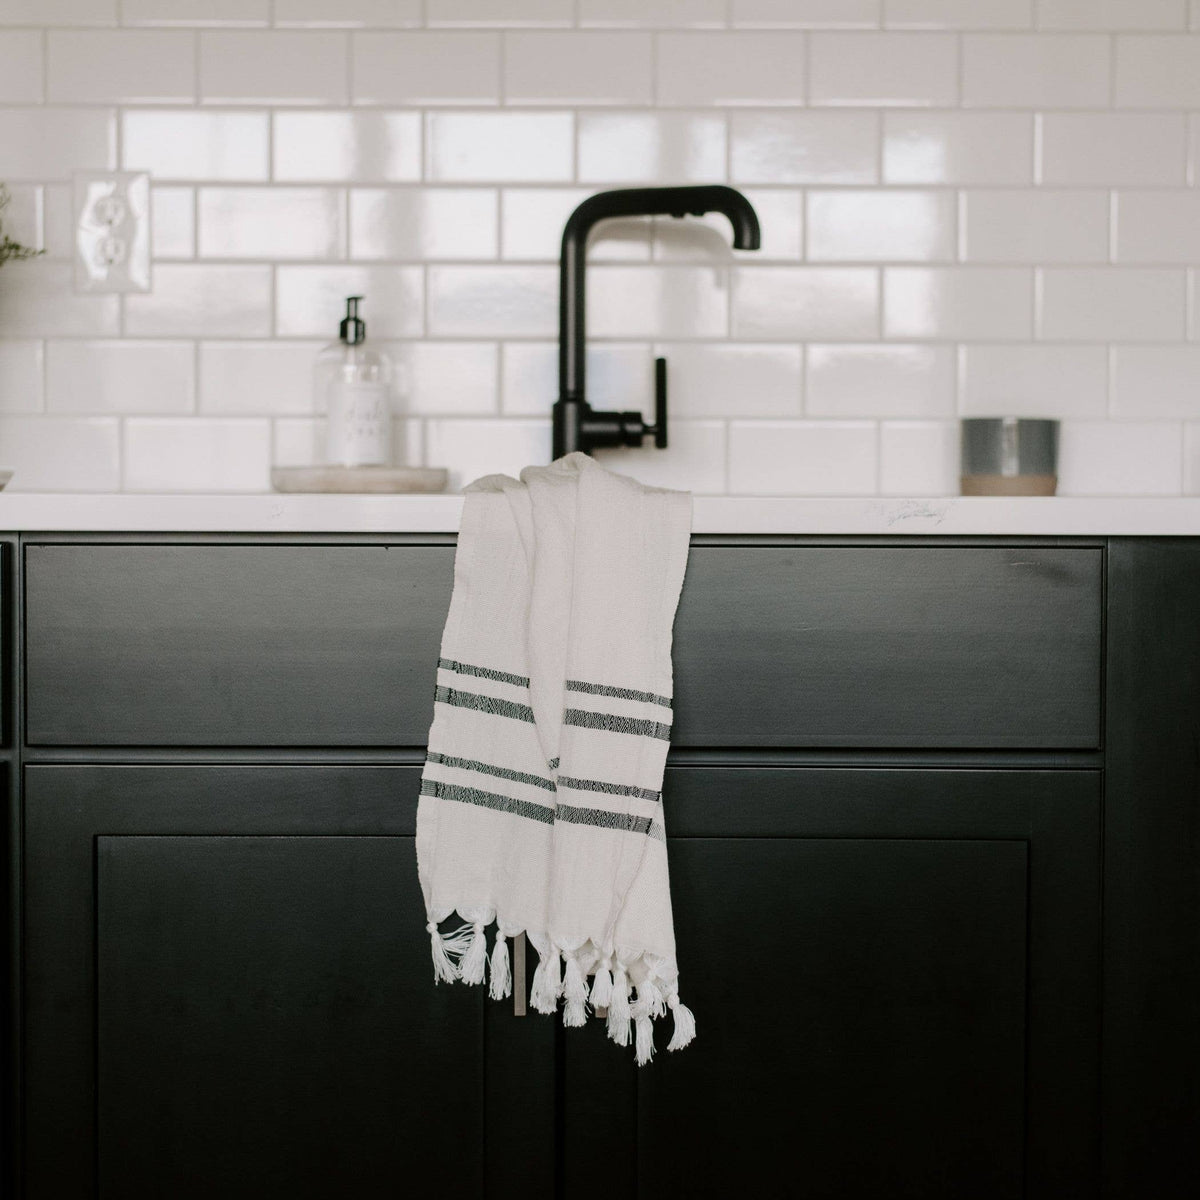 Turkish Cotton + Bamboo Hand Towel - Neutral Stripes